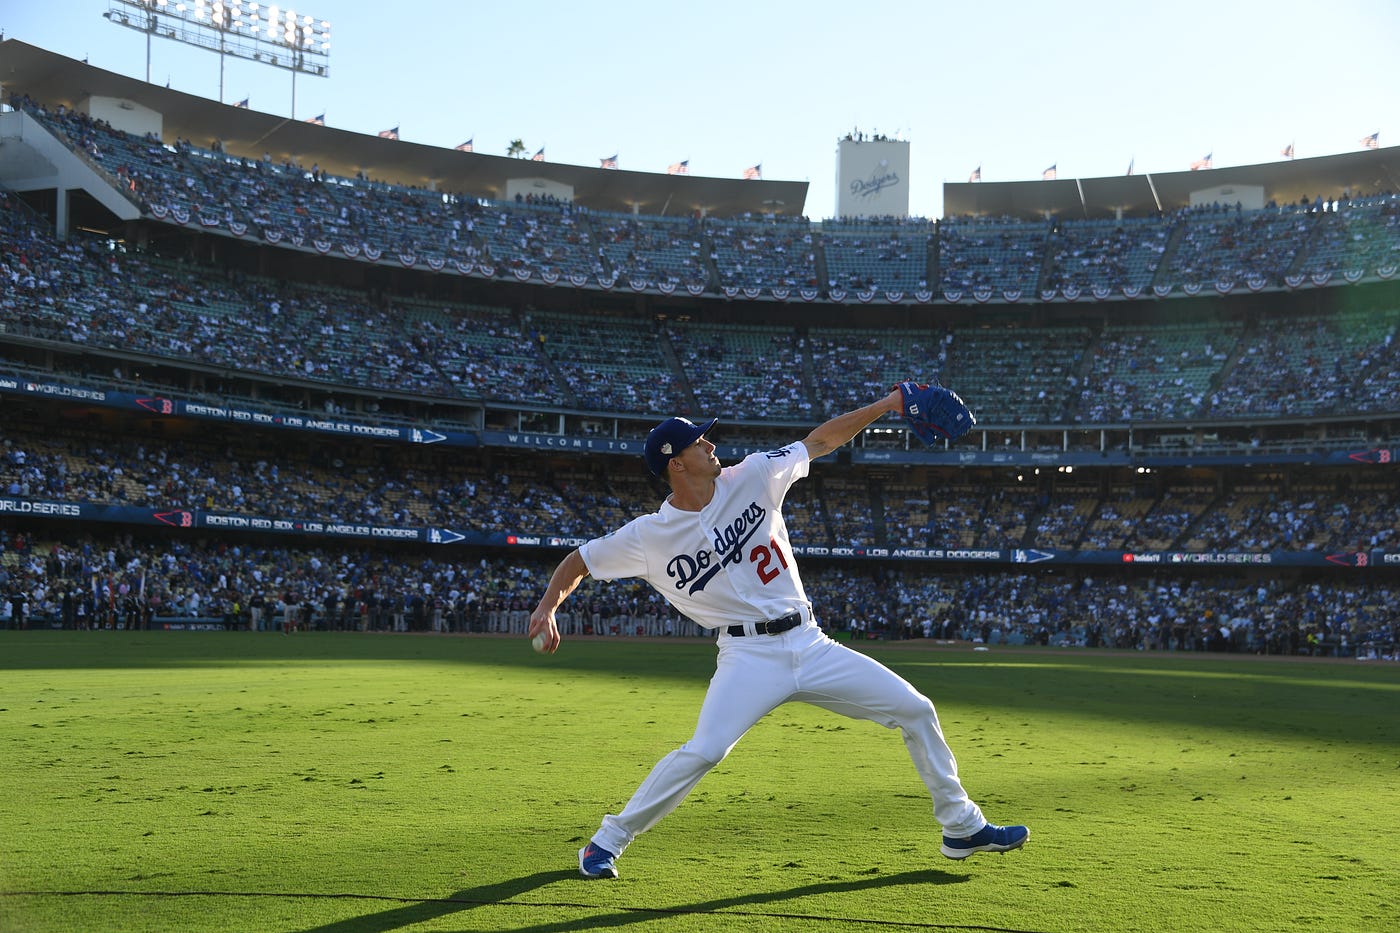 Walker Buehler finds 'a little bit of comfort' in his third start of 2020 -  The Athletic